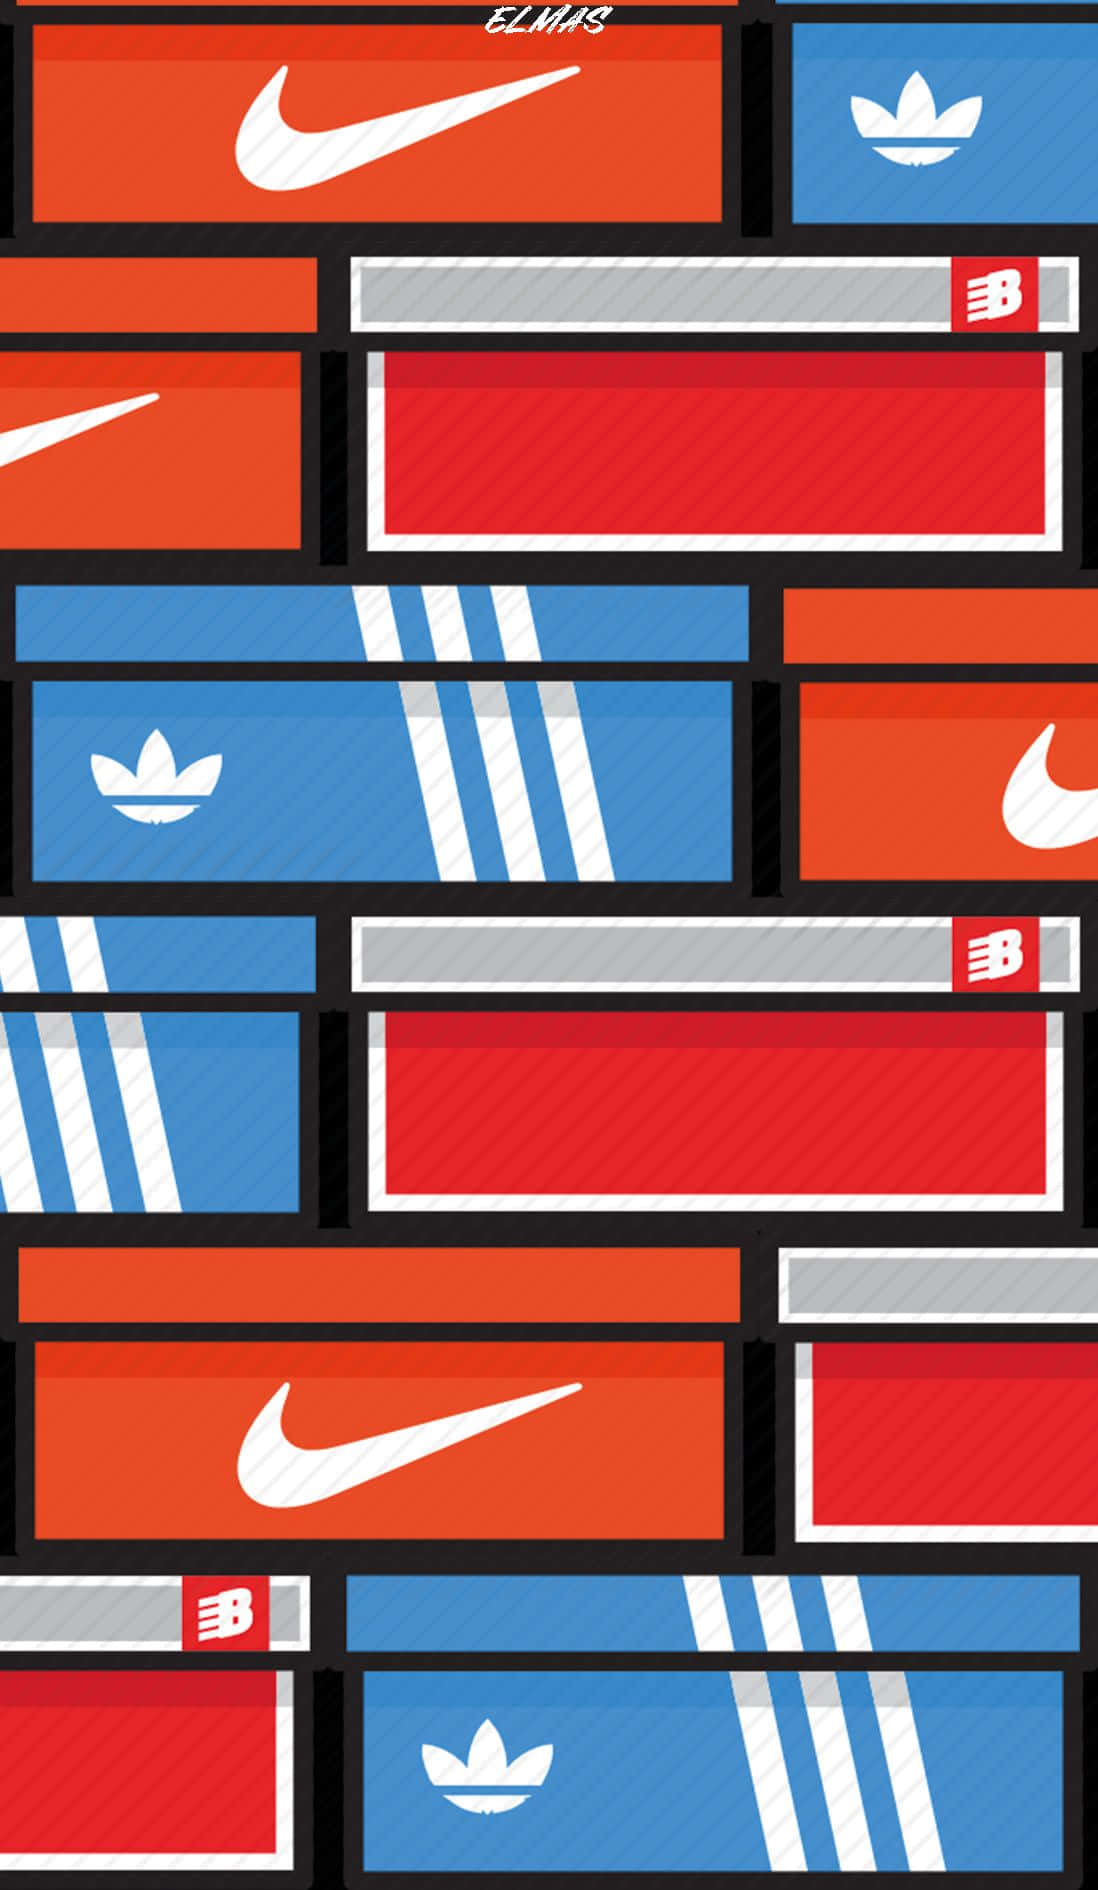 Nike Shoe Boxes In A Brick Wall Wallpaper